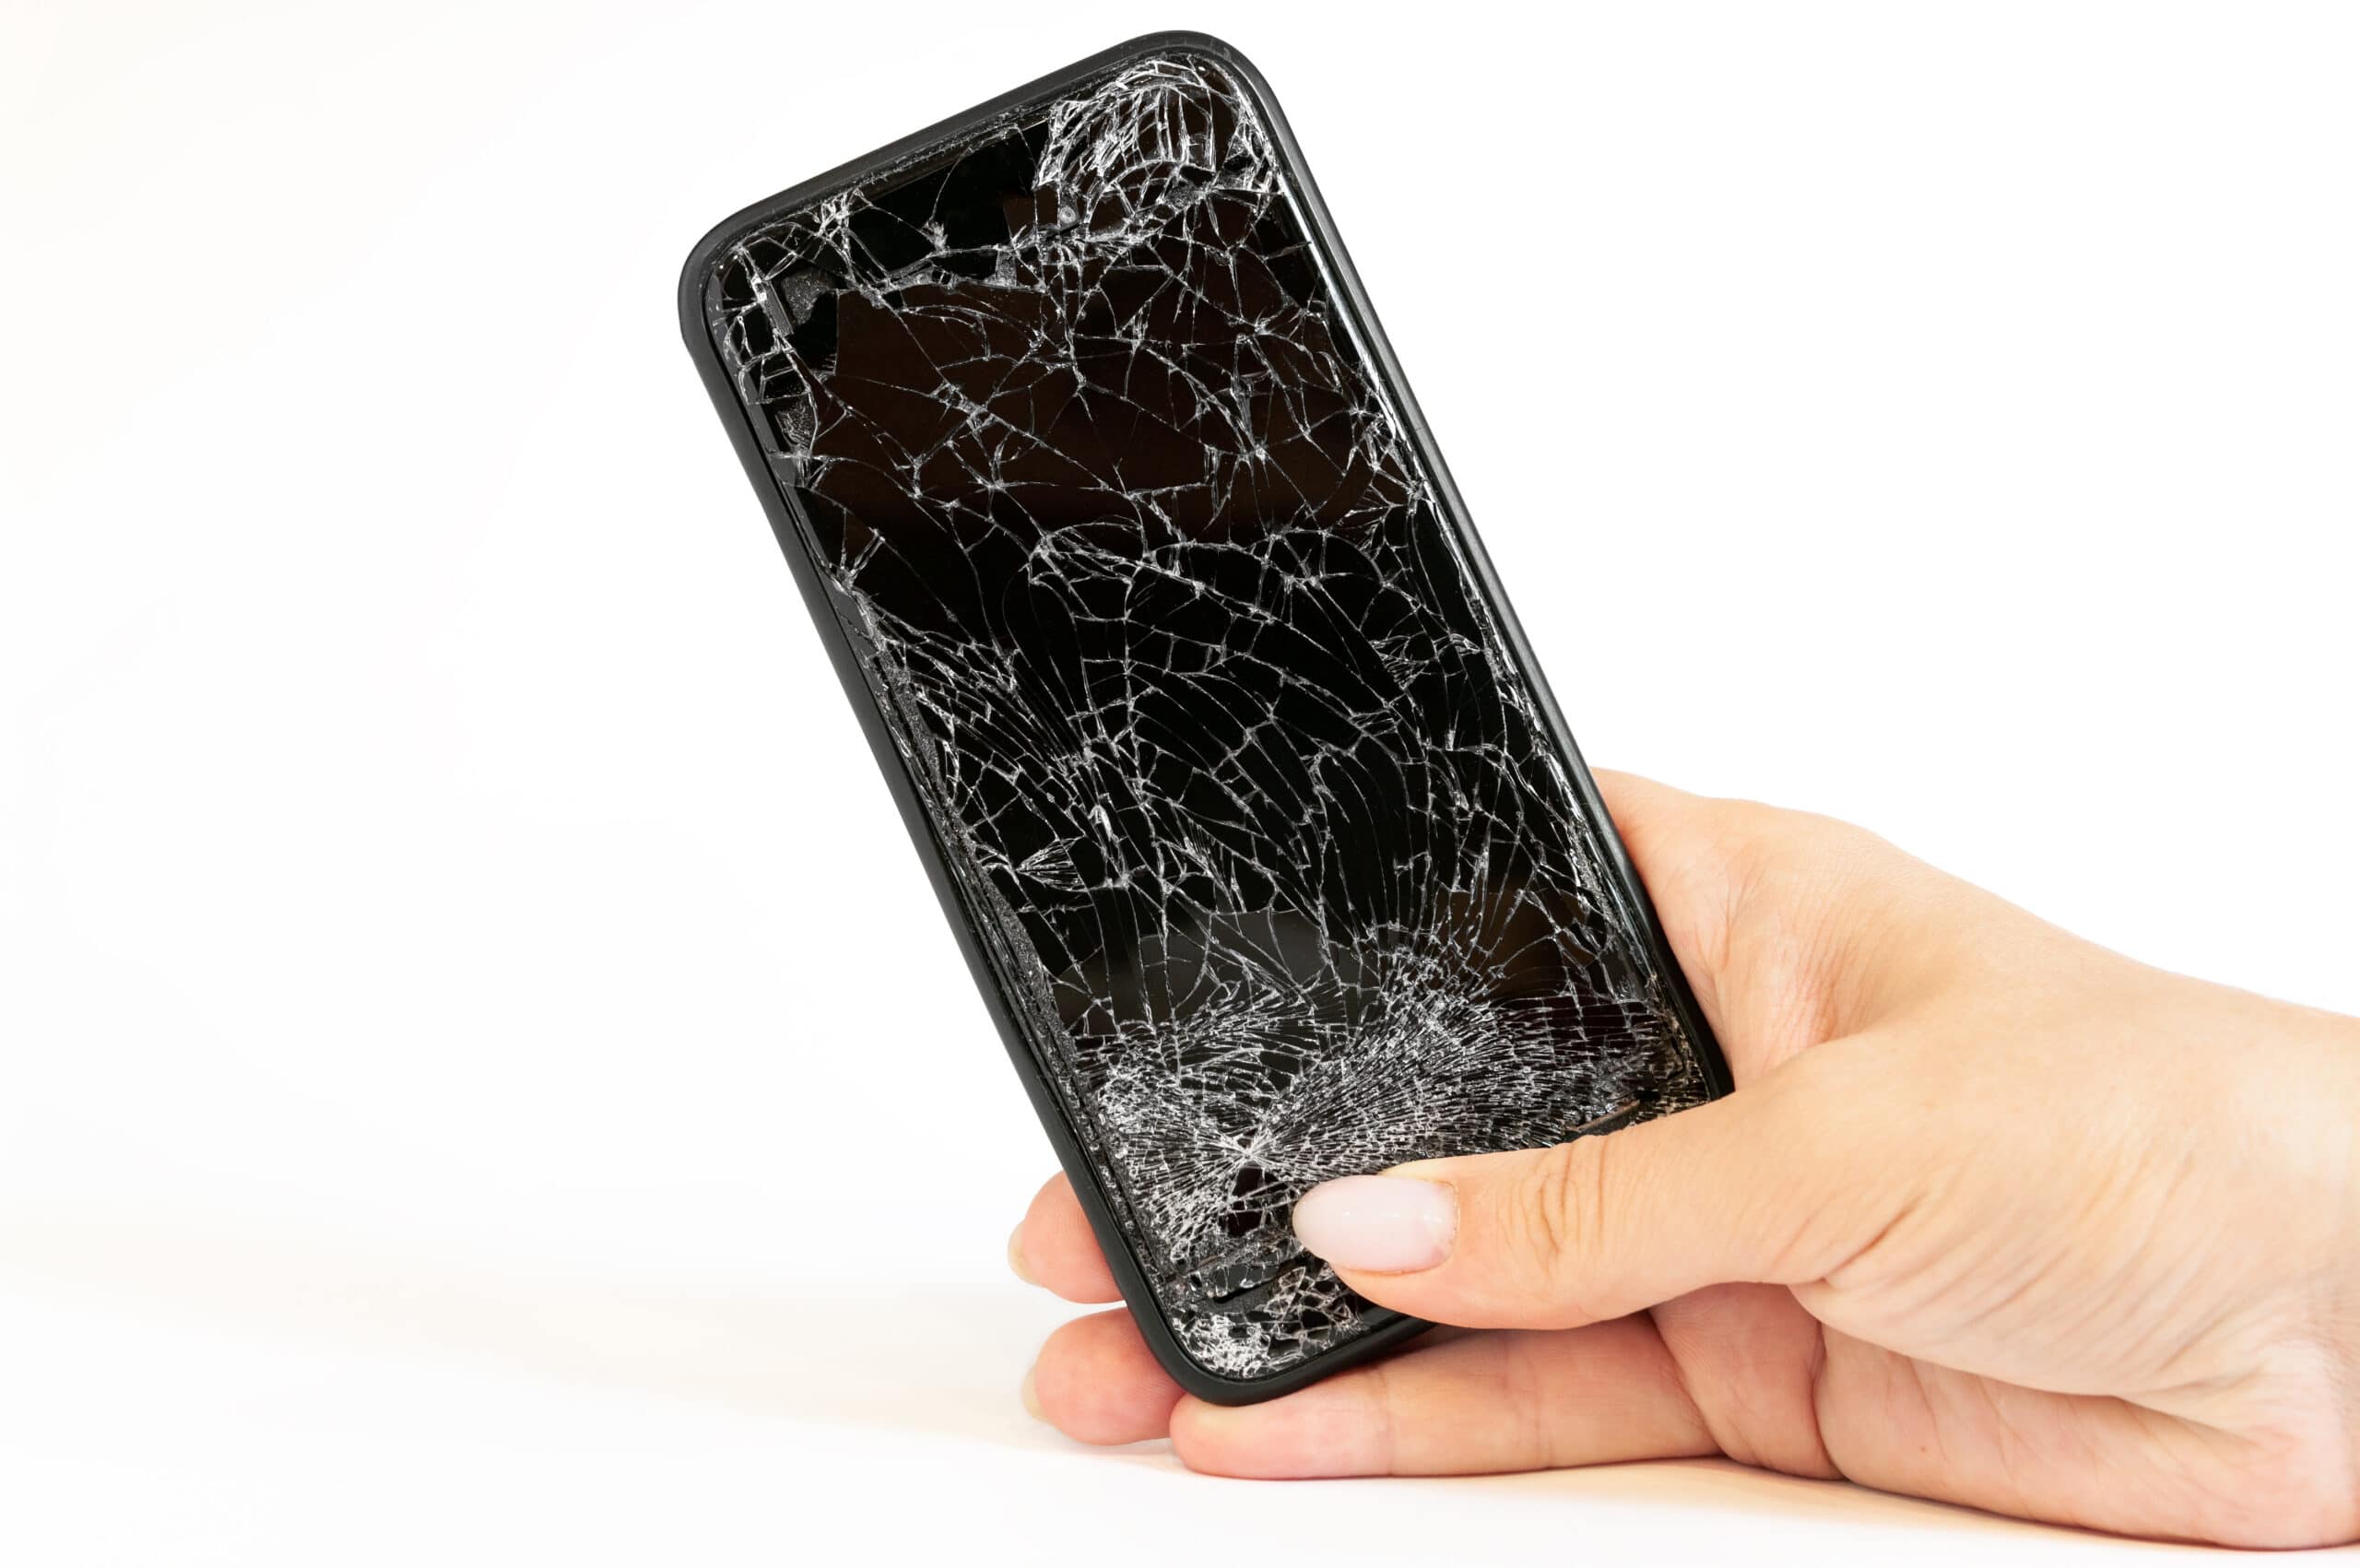 Corning launches new smartphone glass that is more resistant to drops and scratches